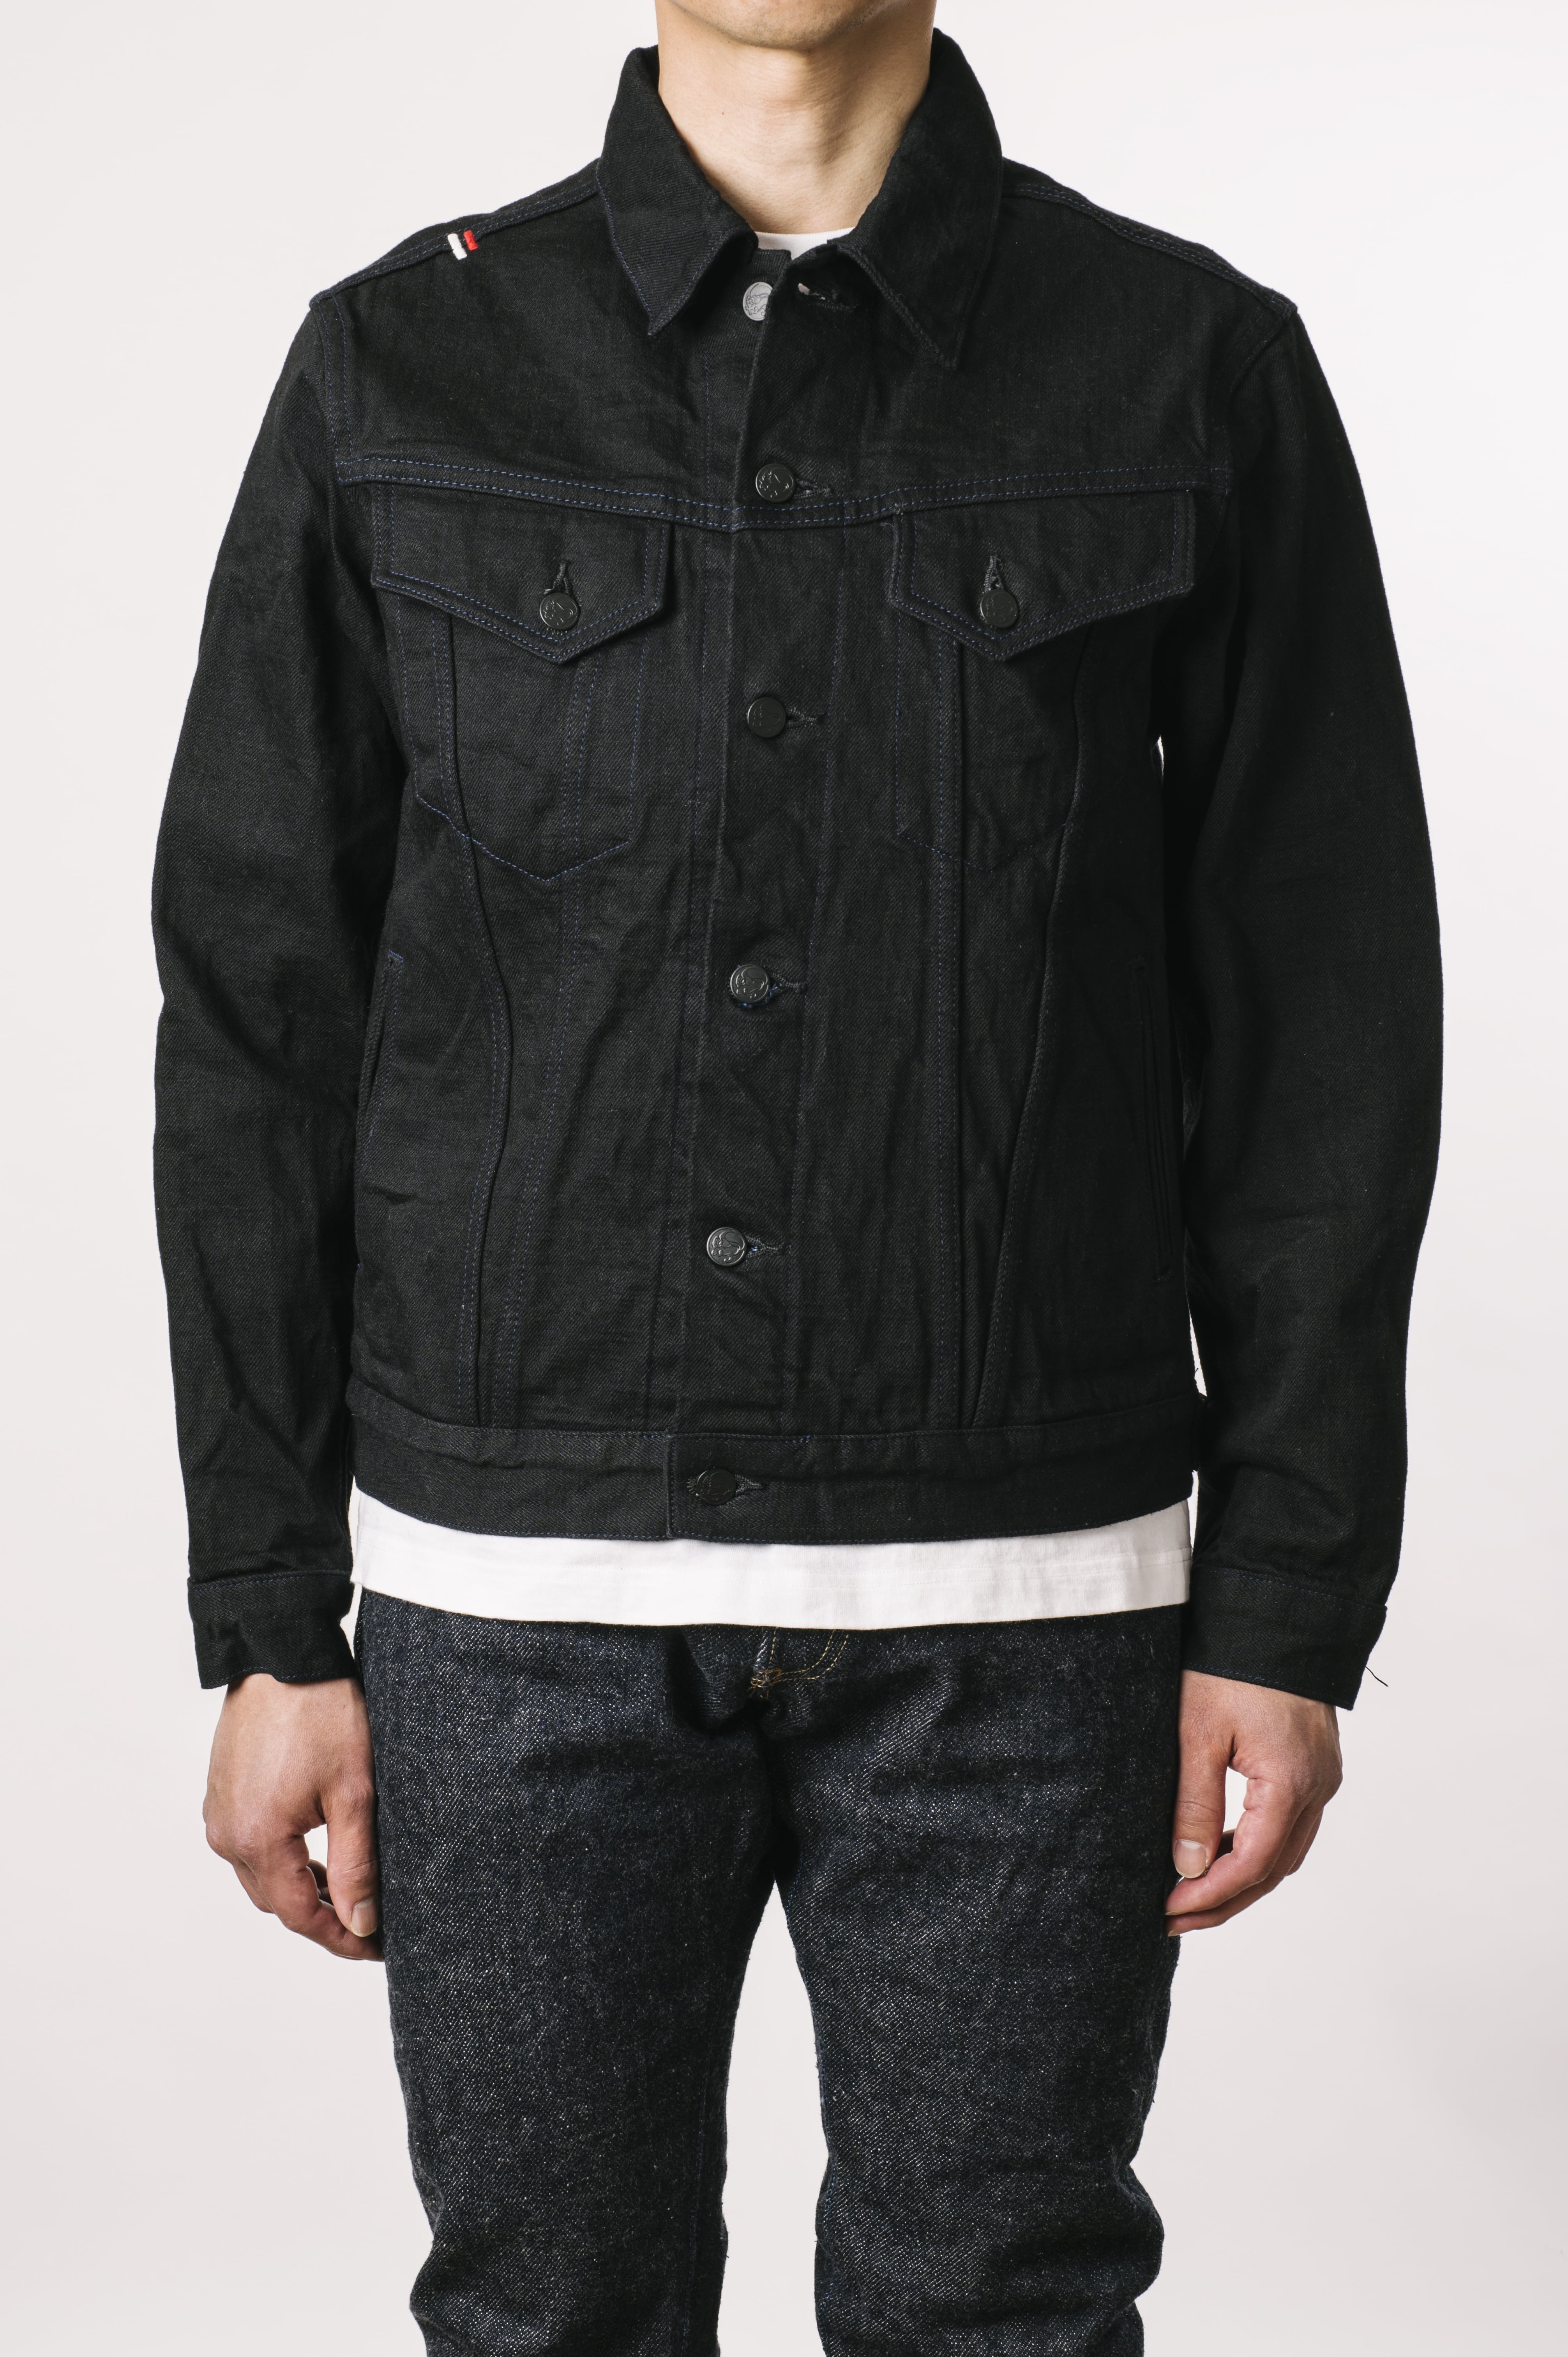 Buy BKJKT3 15.5oz 3rd type Jacket with handwarmers-38-One Wash for SGD ...